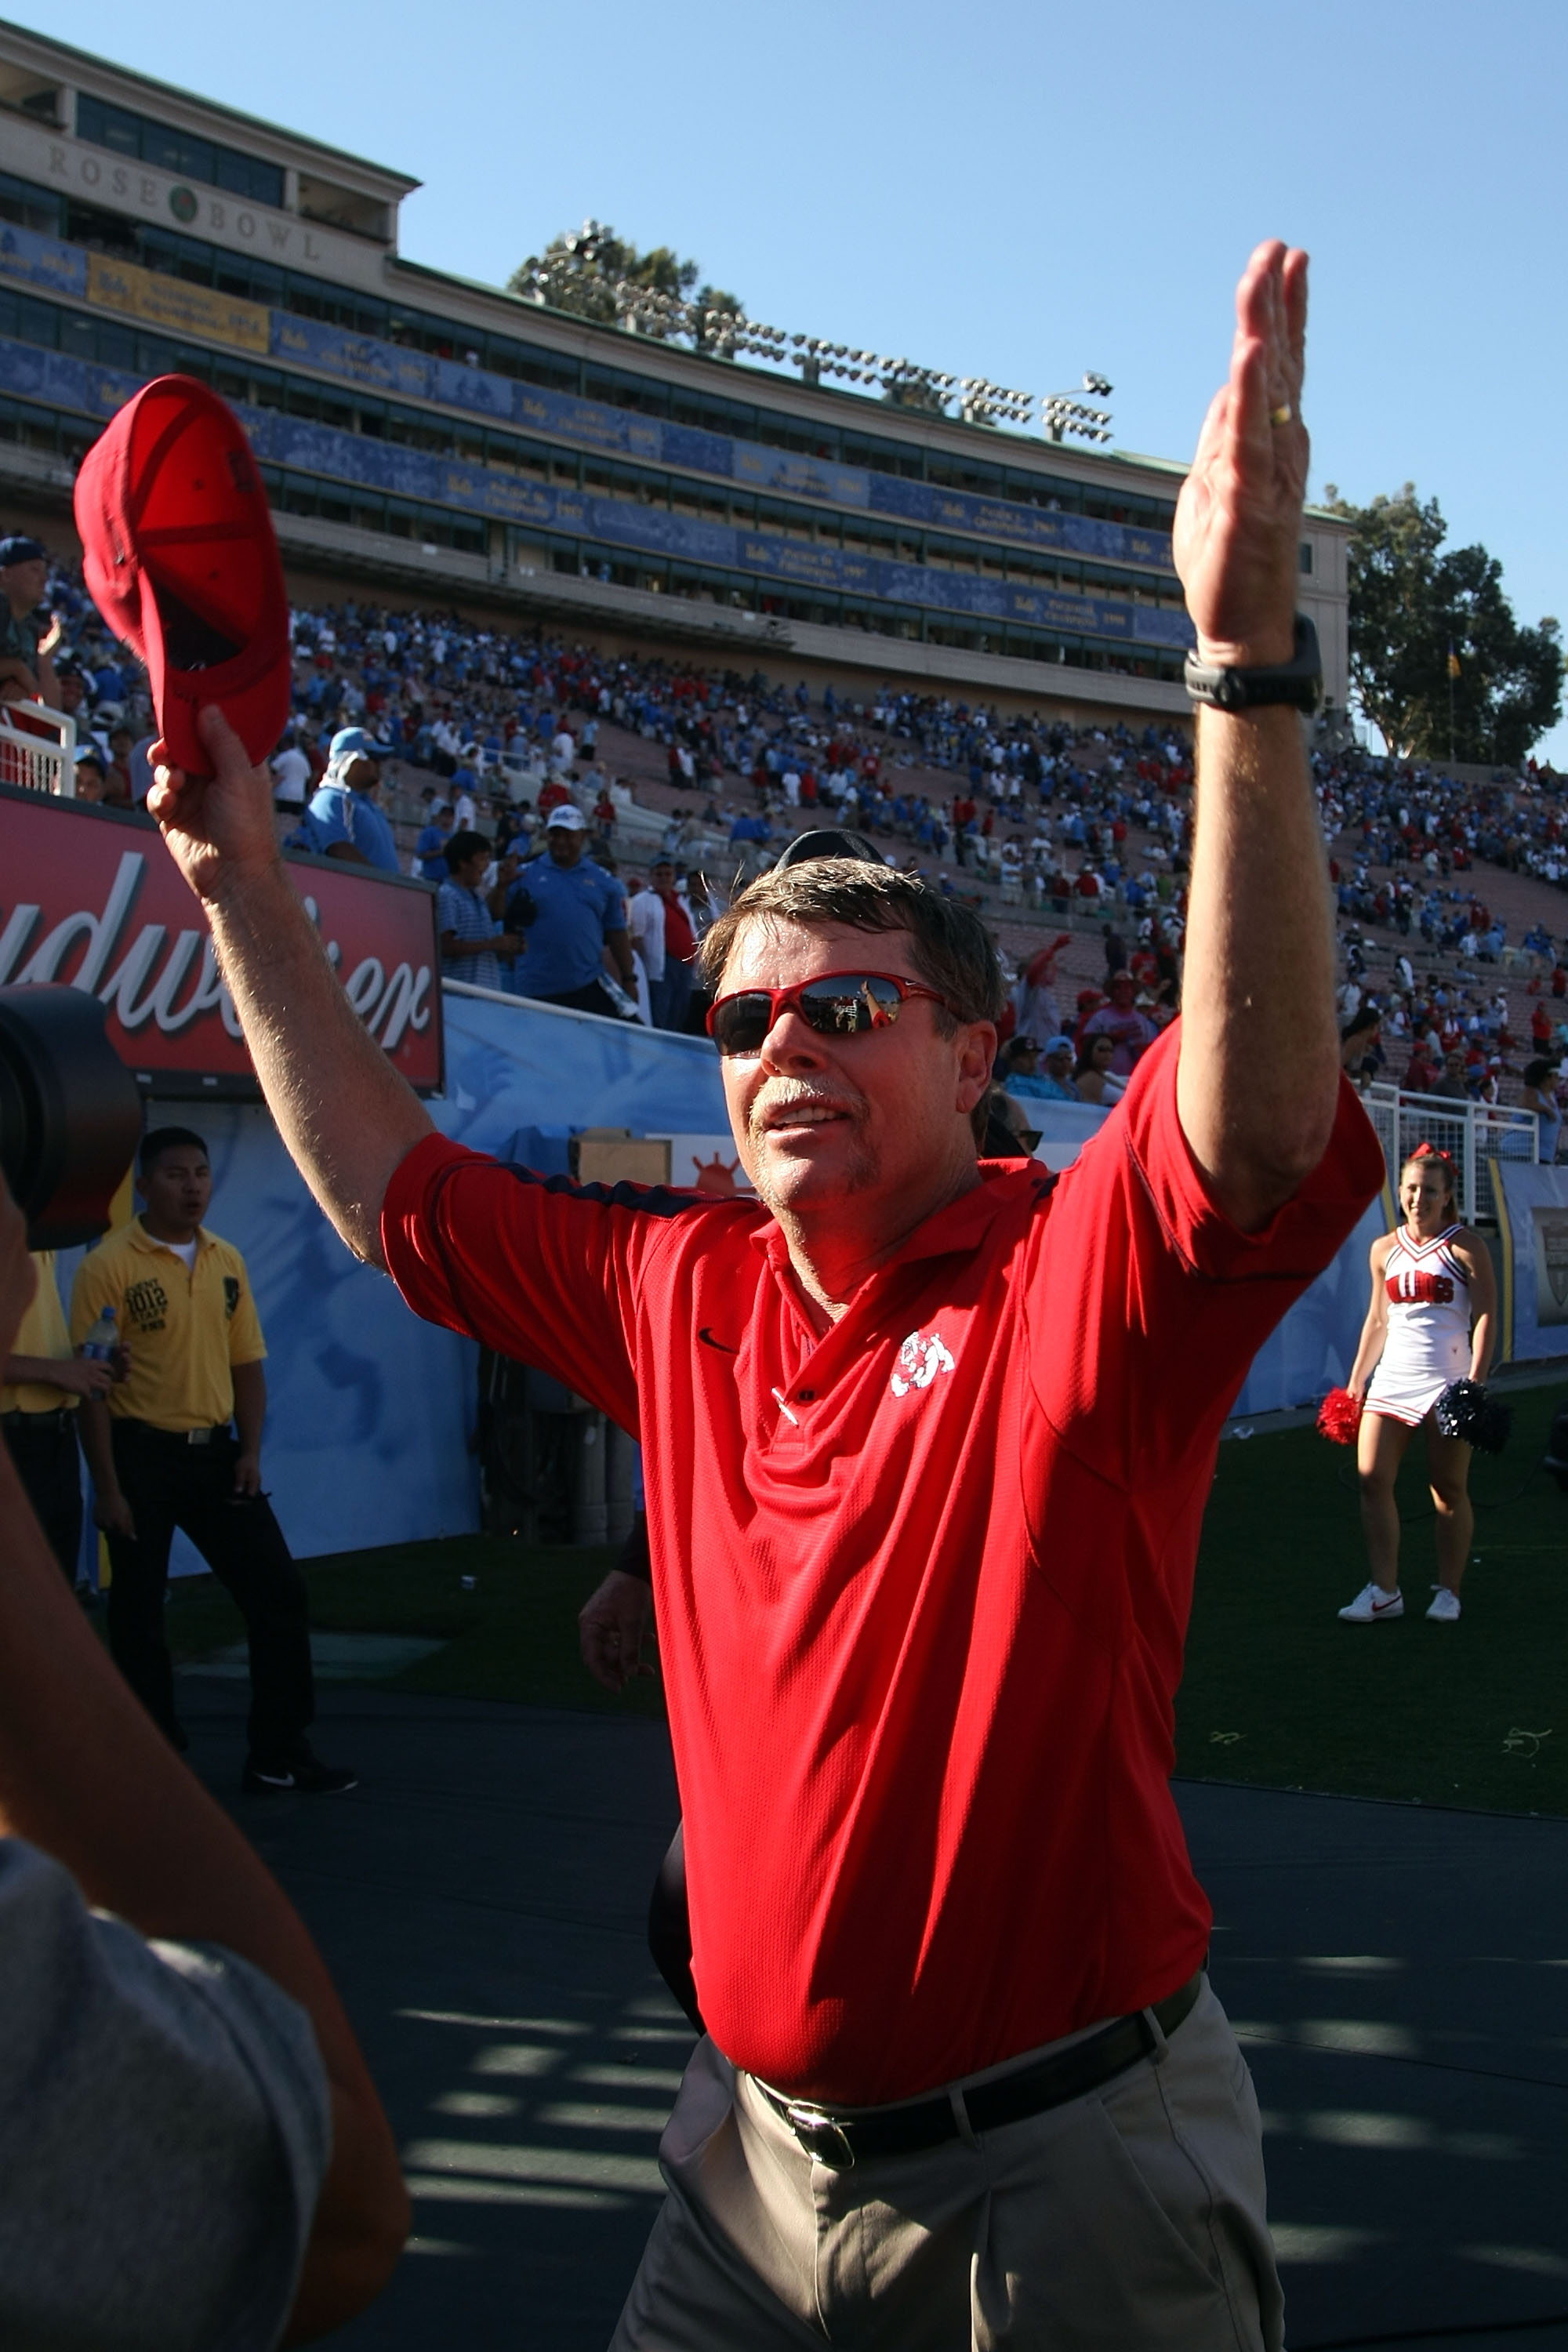 PASADENA, CA - SEPTEMBER 27:  Head coach Pat Hill of the Frenso State Bulldogs celebrates after defearing the UCLA Bruins on September 27, 2008 at the Rose Bowl in Pasadena, California.  (Photo by Stephen Dunn/Getty Images)